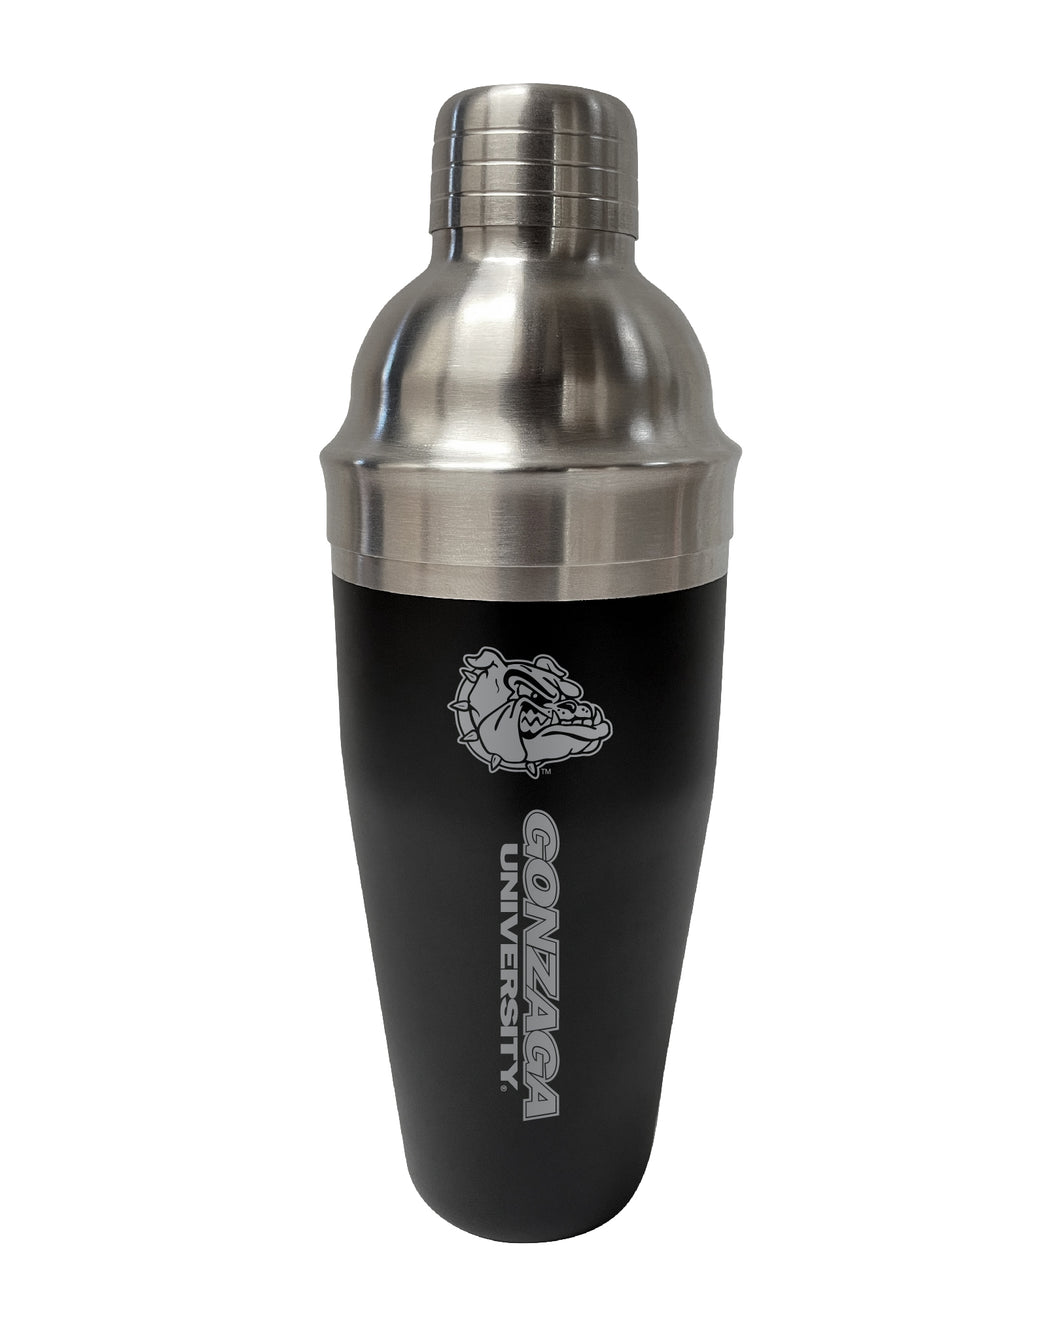 Gonzaga Bulldogs NCAA Official 24 oz Engraved Stainless Steel Cocktail Shaker | College Team Spirit Drink Mixer